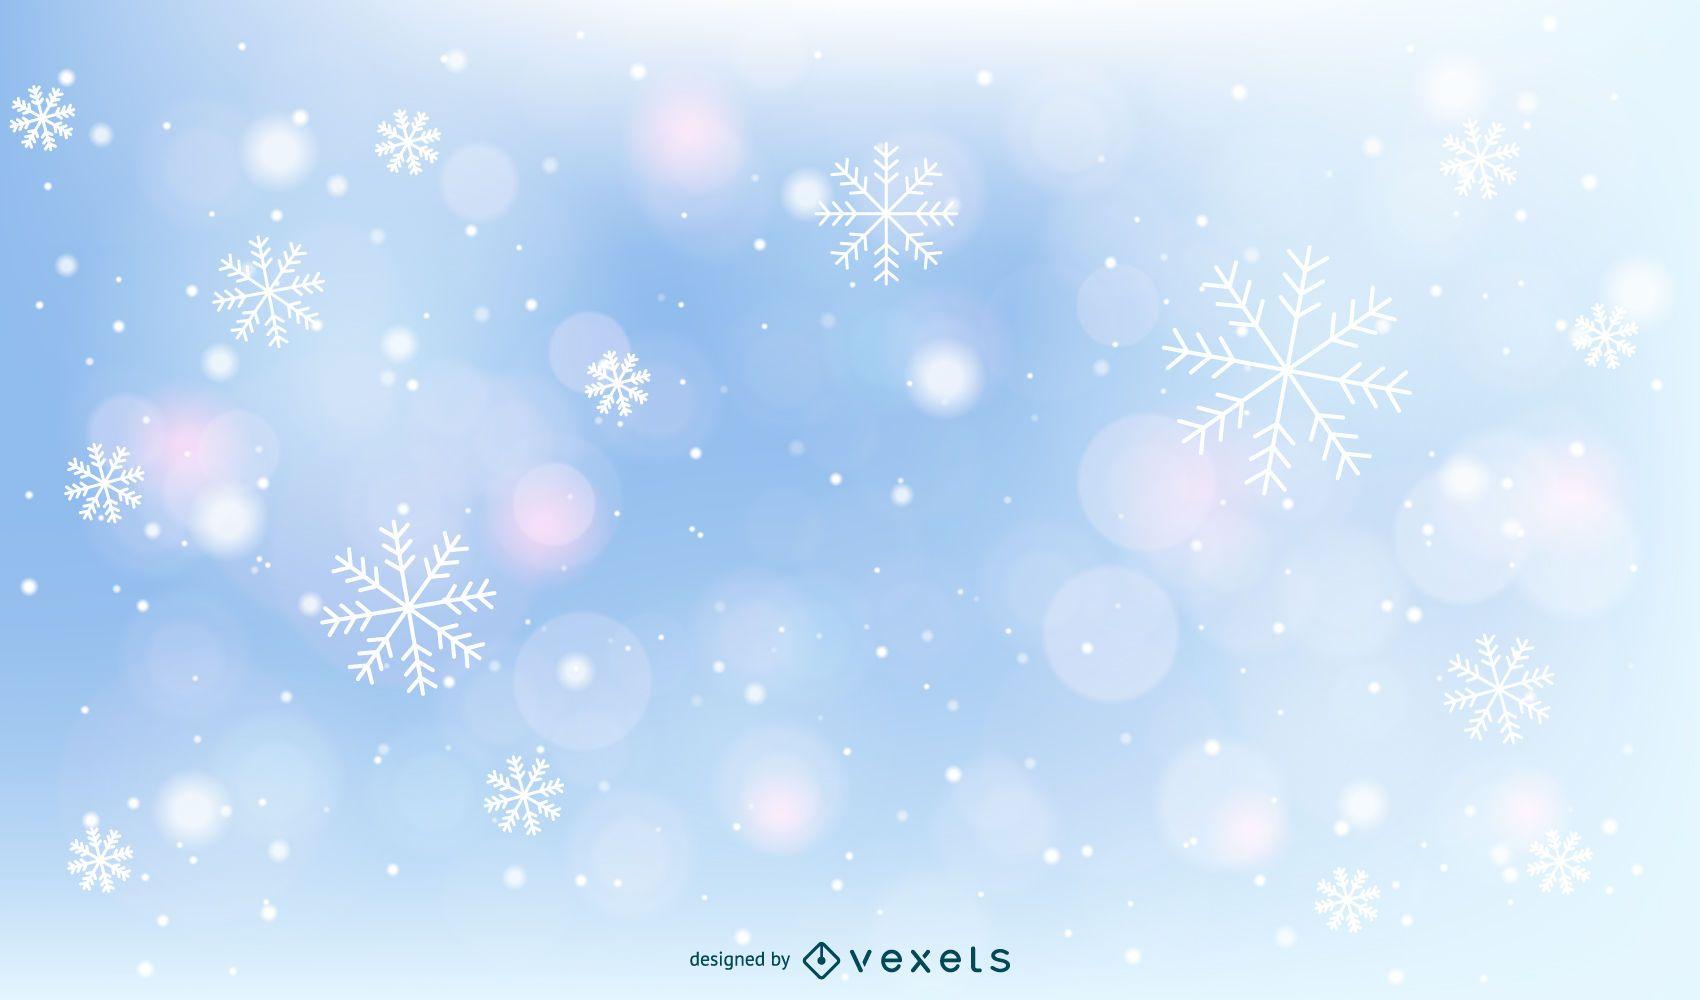 Christmas snowflakes backgrounds